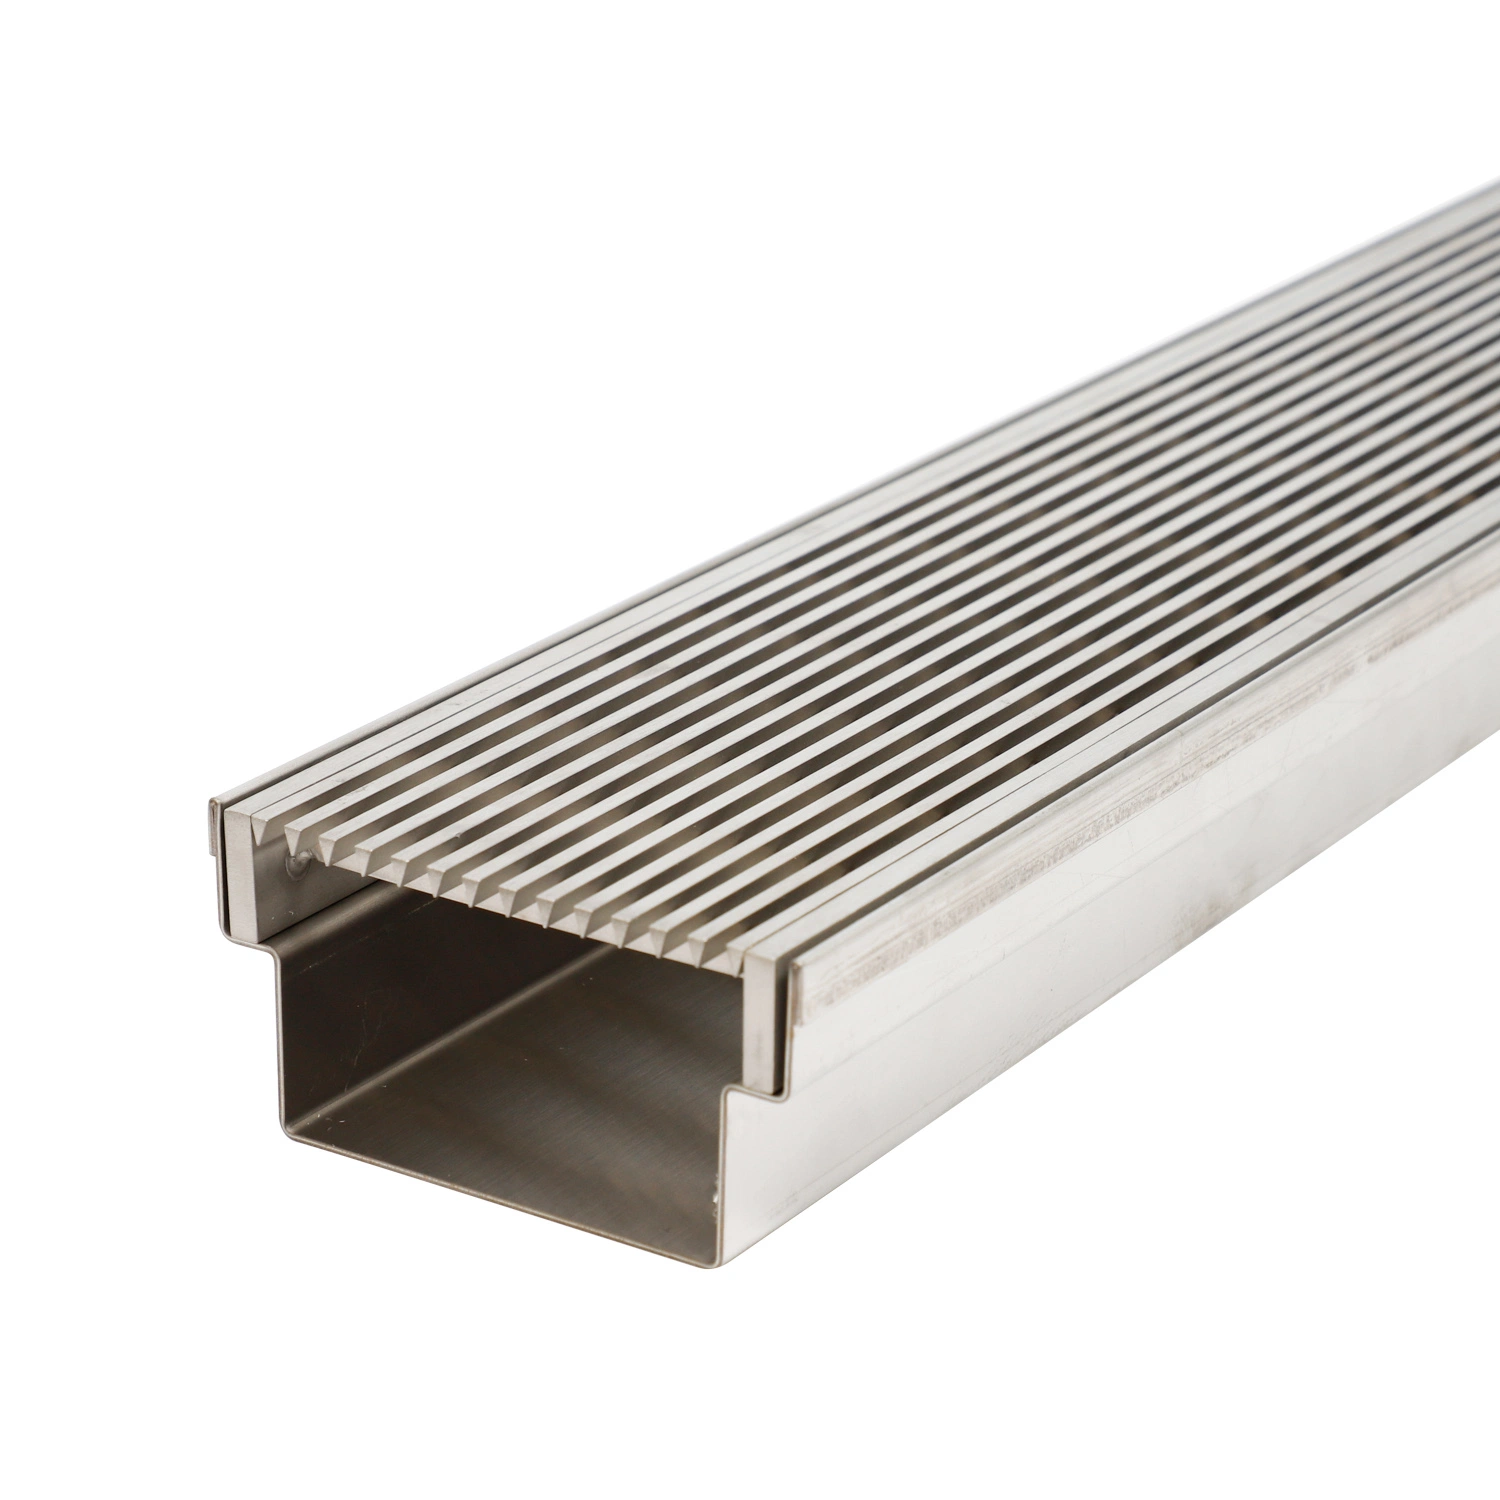 High quality/High cost performance  Hot Sale Linear Floor Drain Euro Floor Drains High quality/High cost performance  Stainless Steel Shower Long Floor Drain for Outdoor